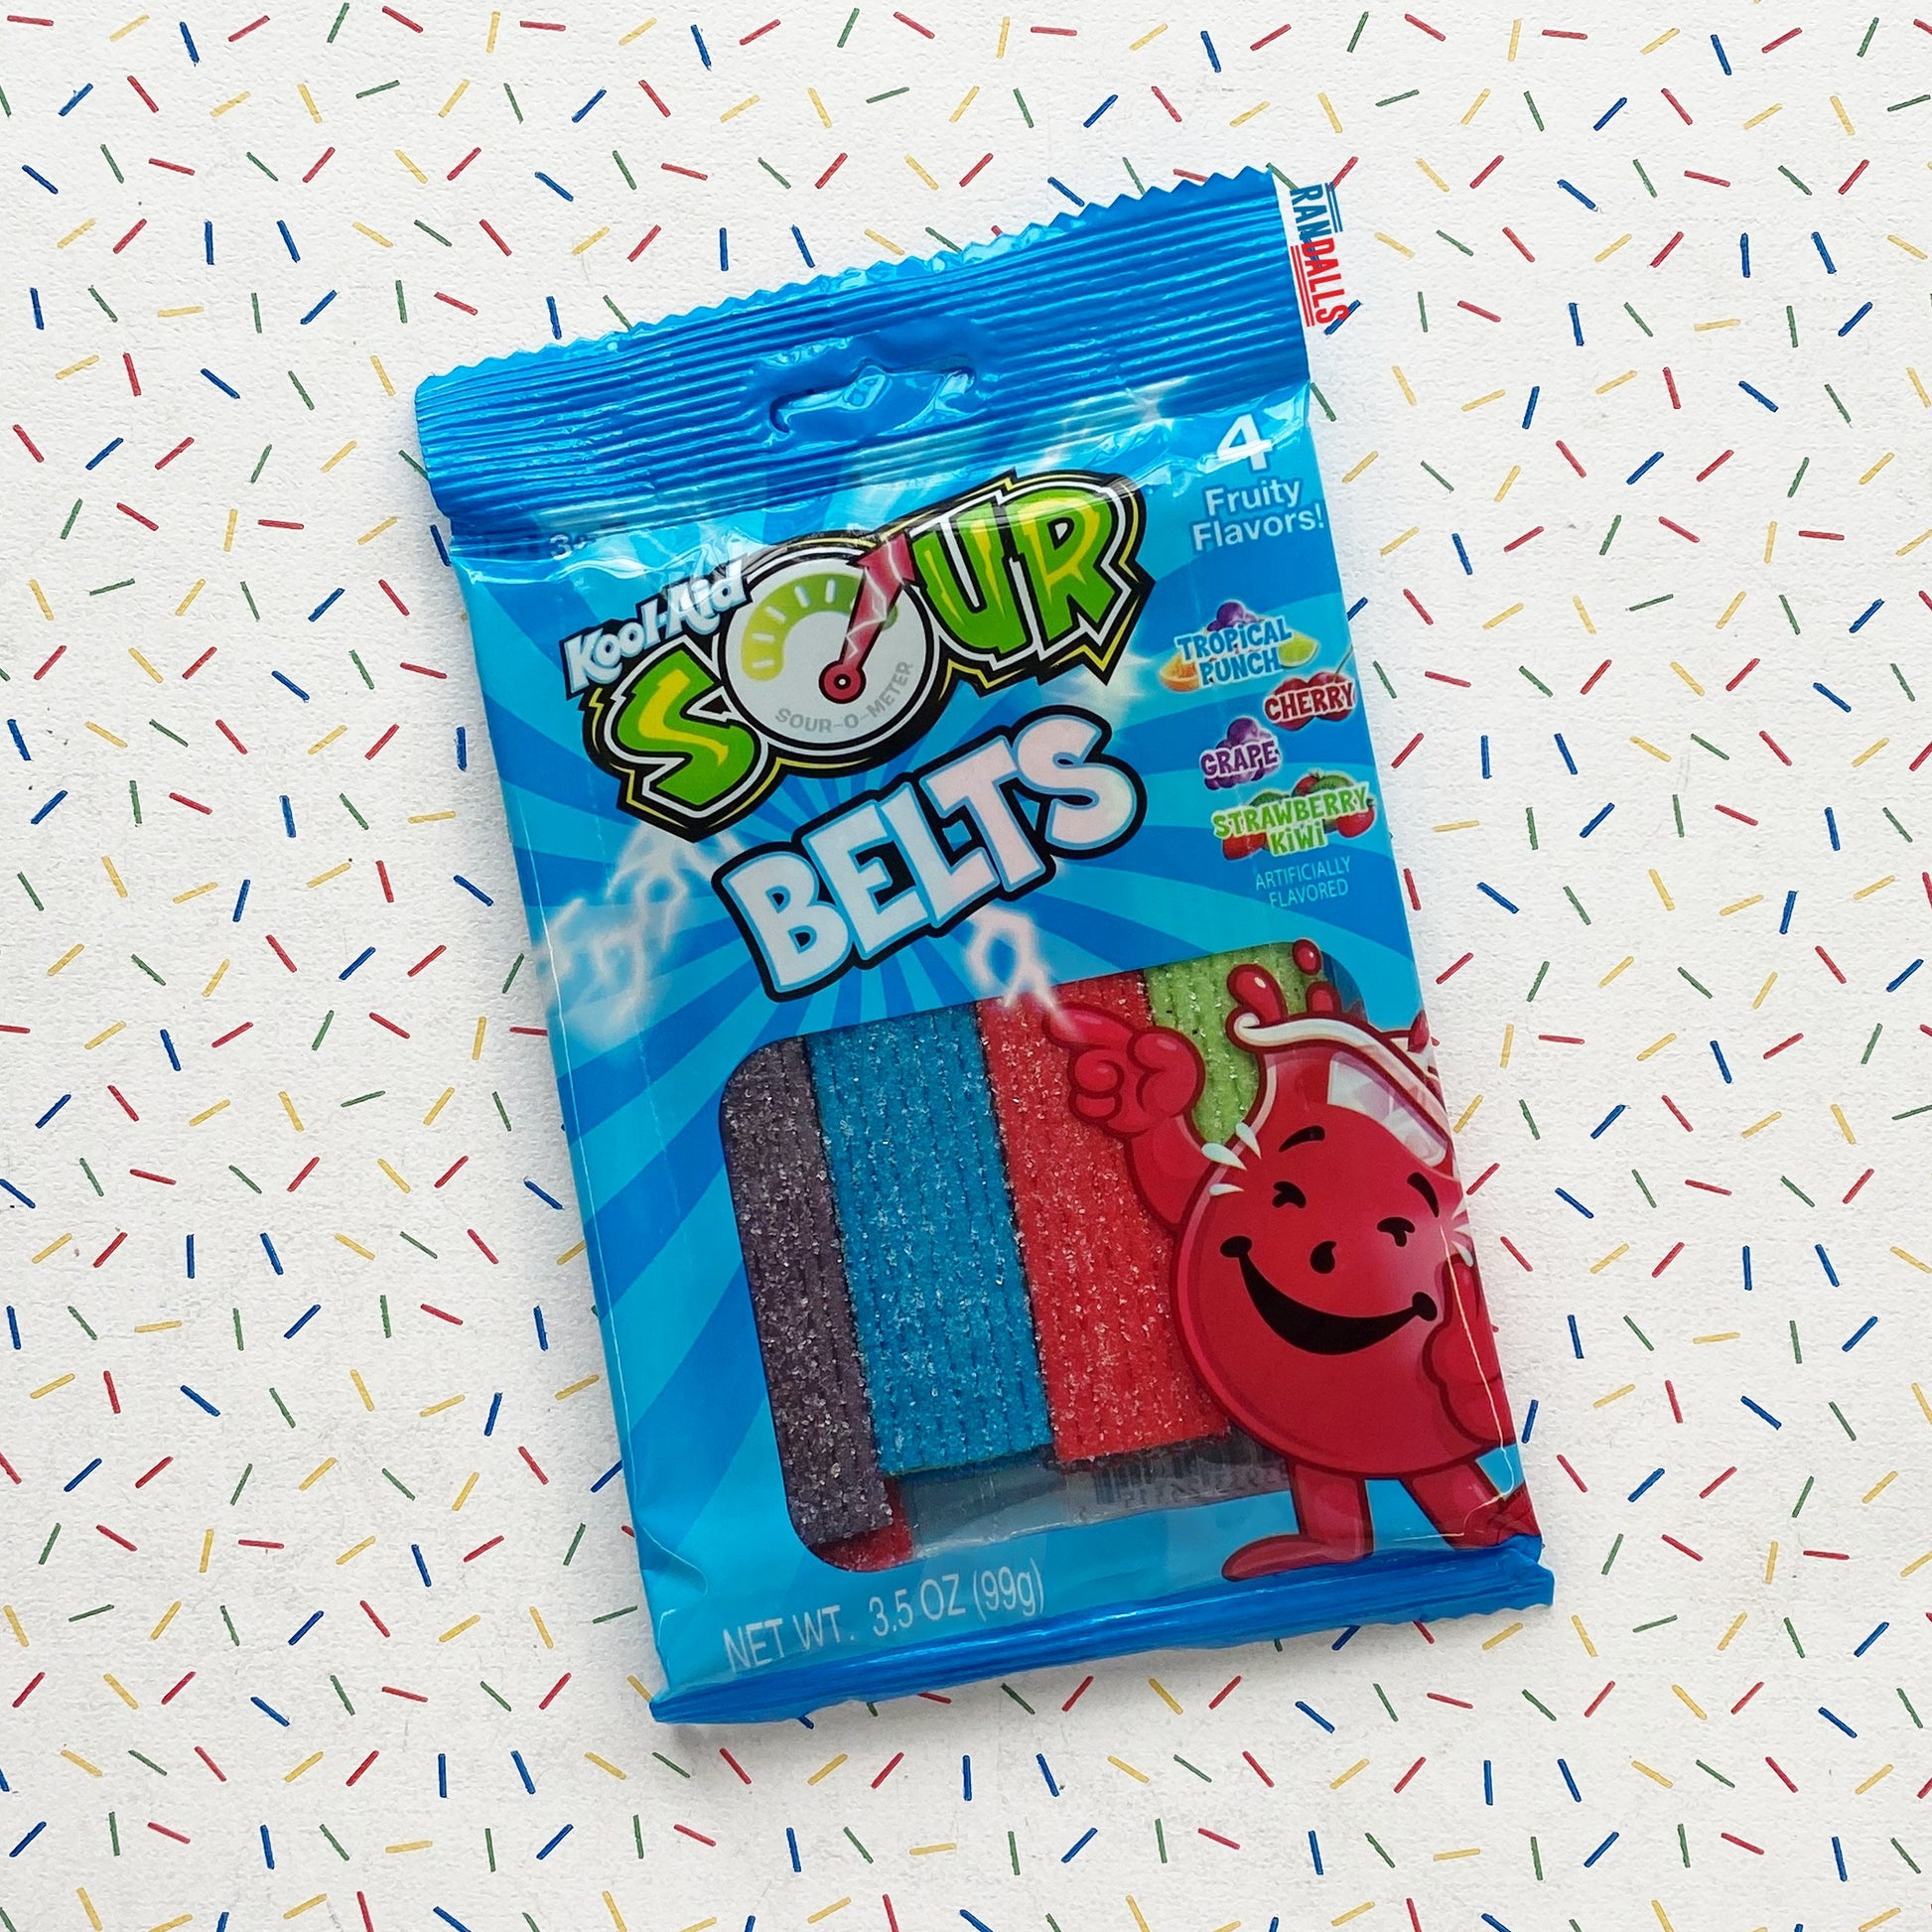 kool-aid, kool aid sour belts, tropical punch, cherry, grape and strawberry kiwi, sour streamers, sour candy, american candy, usa, randalls,